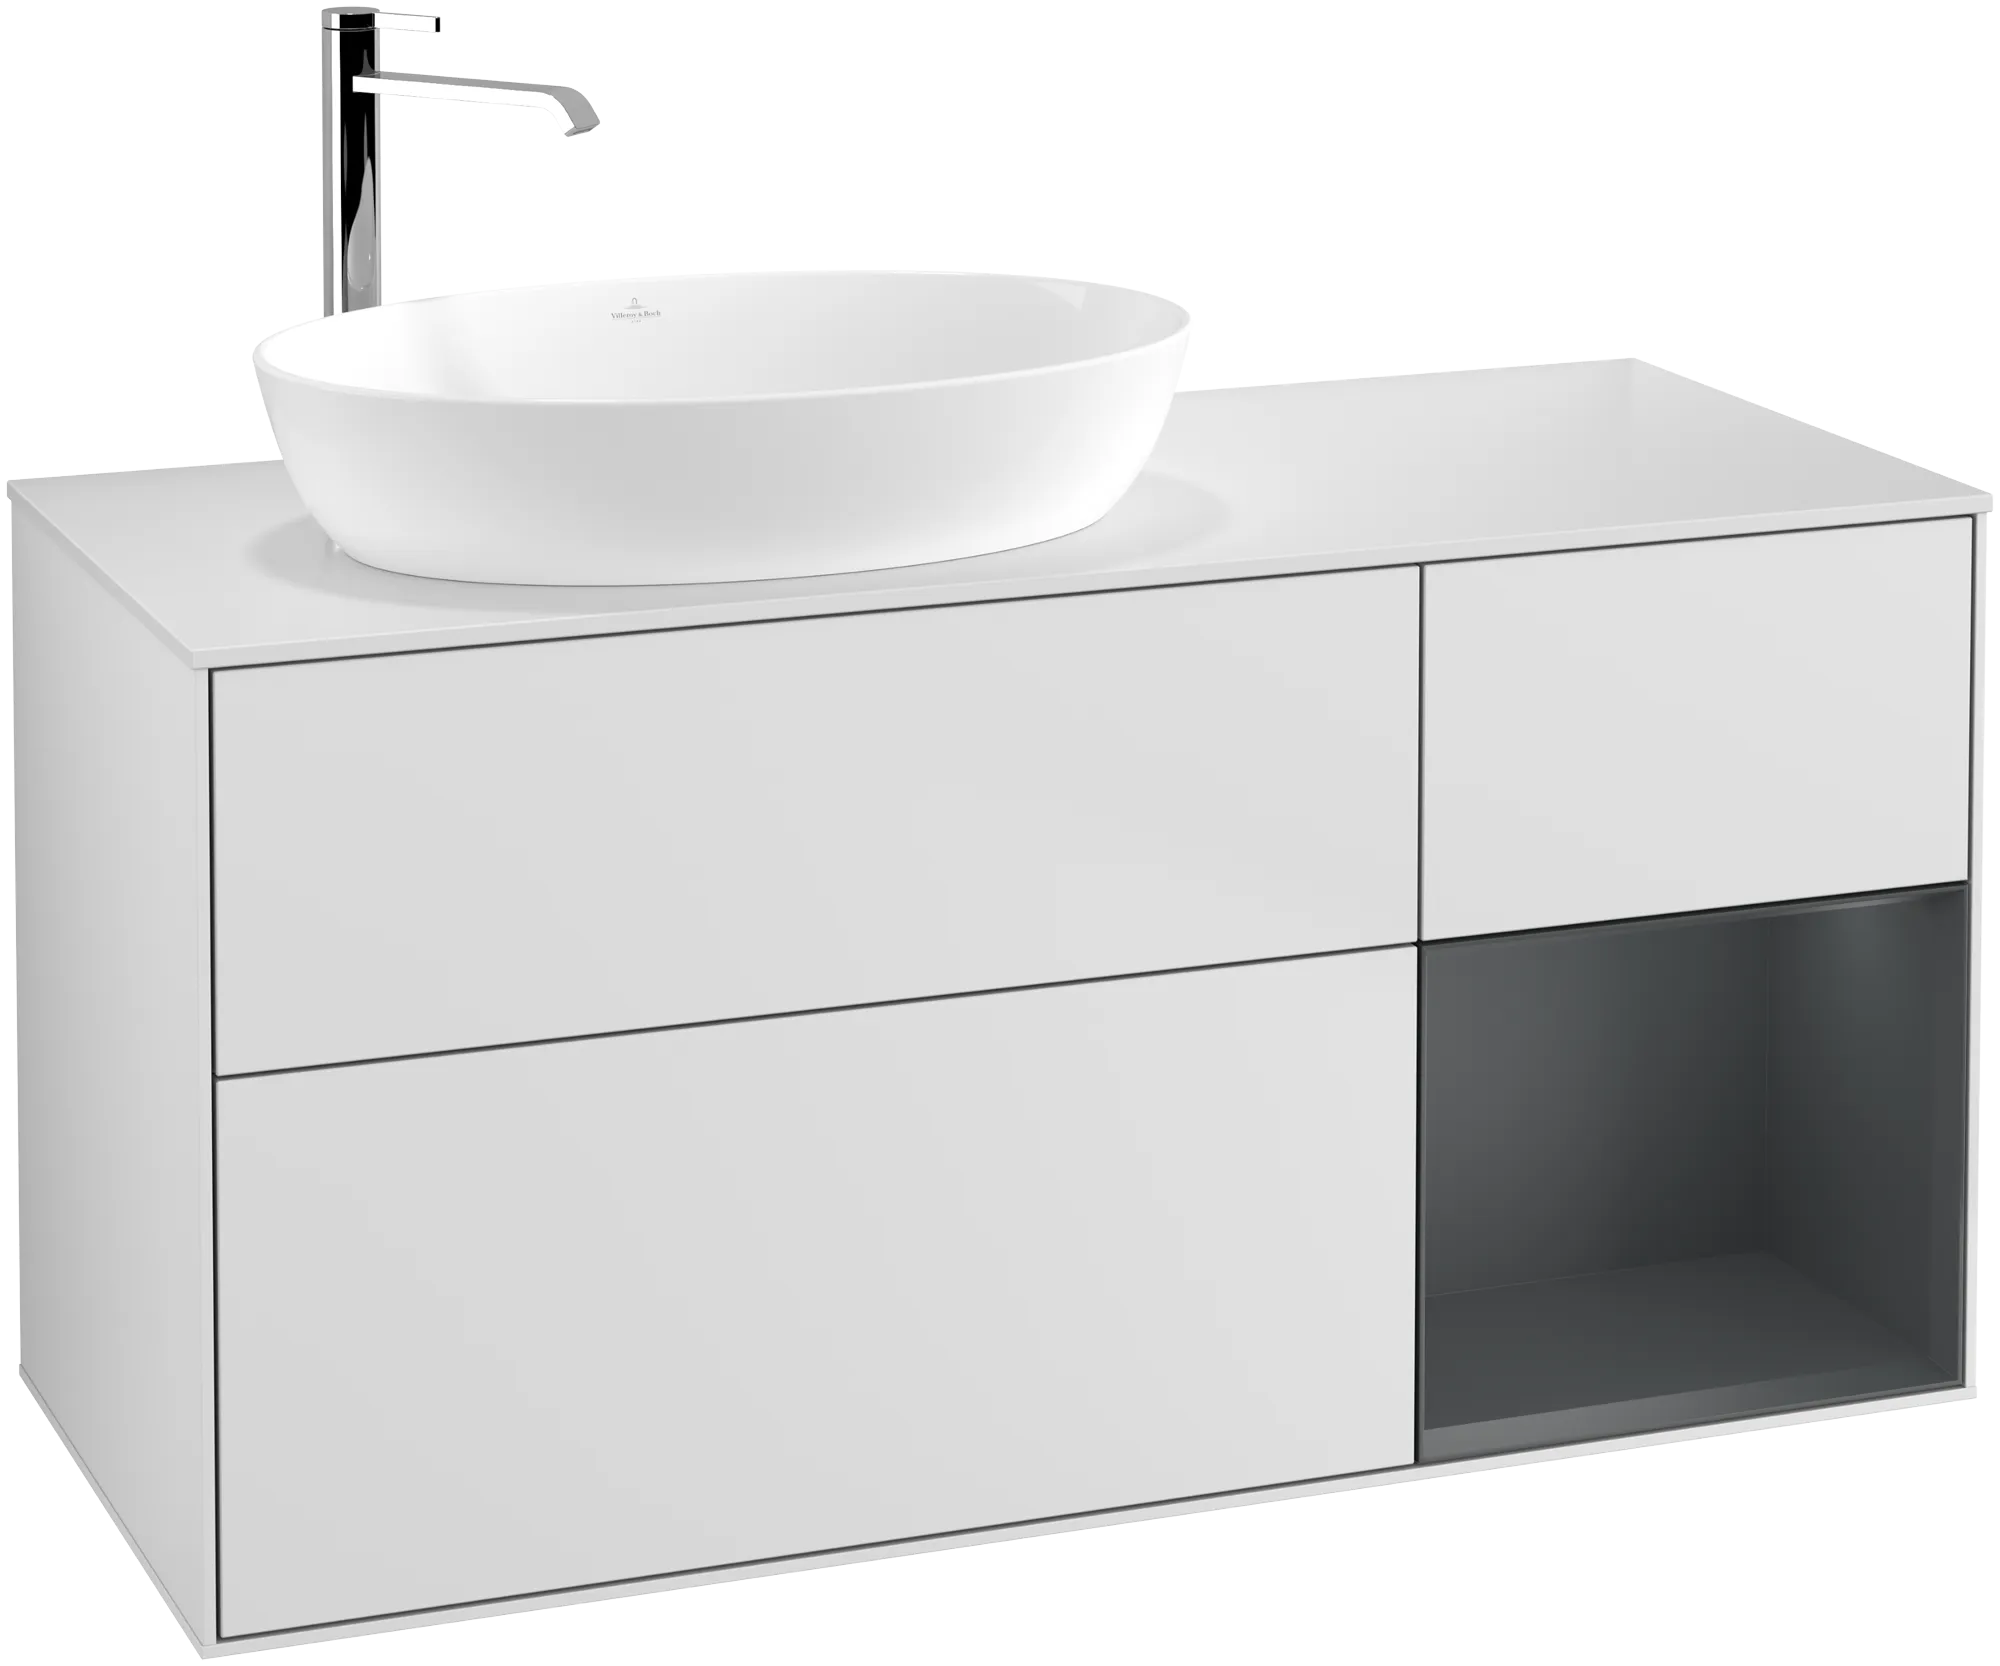 VILLEROY BOCH Finion Vanity unit, with lighting, 3 pull-out compartments, 1200 x 603 x 501 mm, White Matt Lacquer / Midnight Blue Matt Lacquer / Glass White Matt #G931HGMT resmi